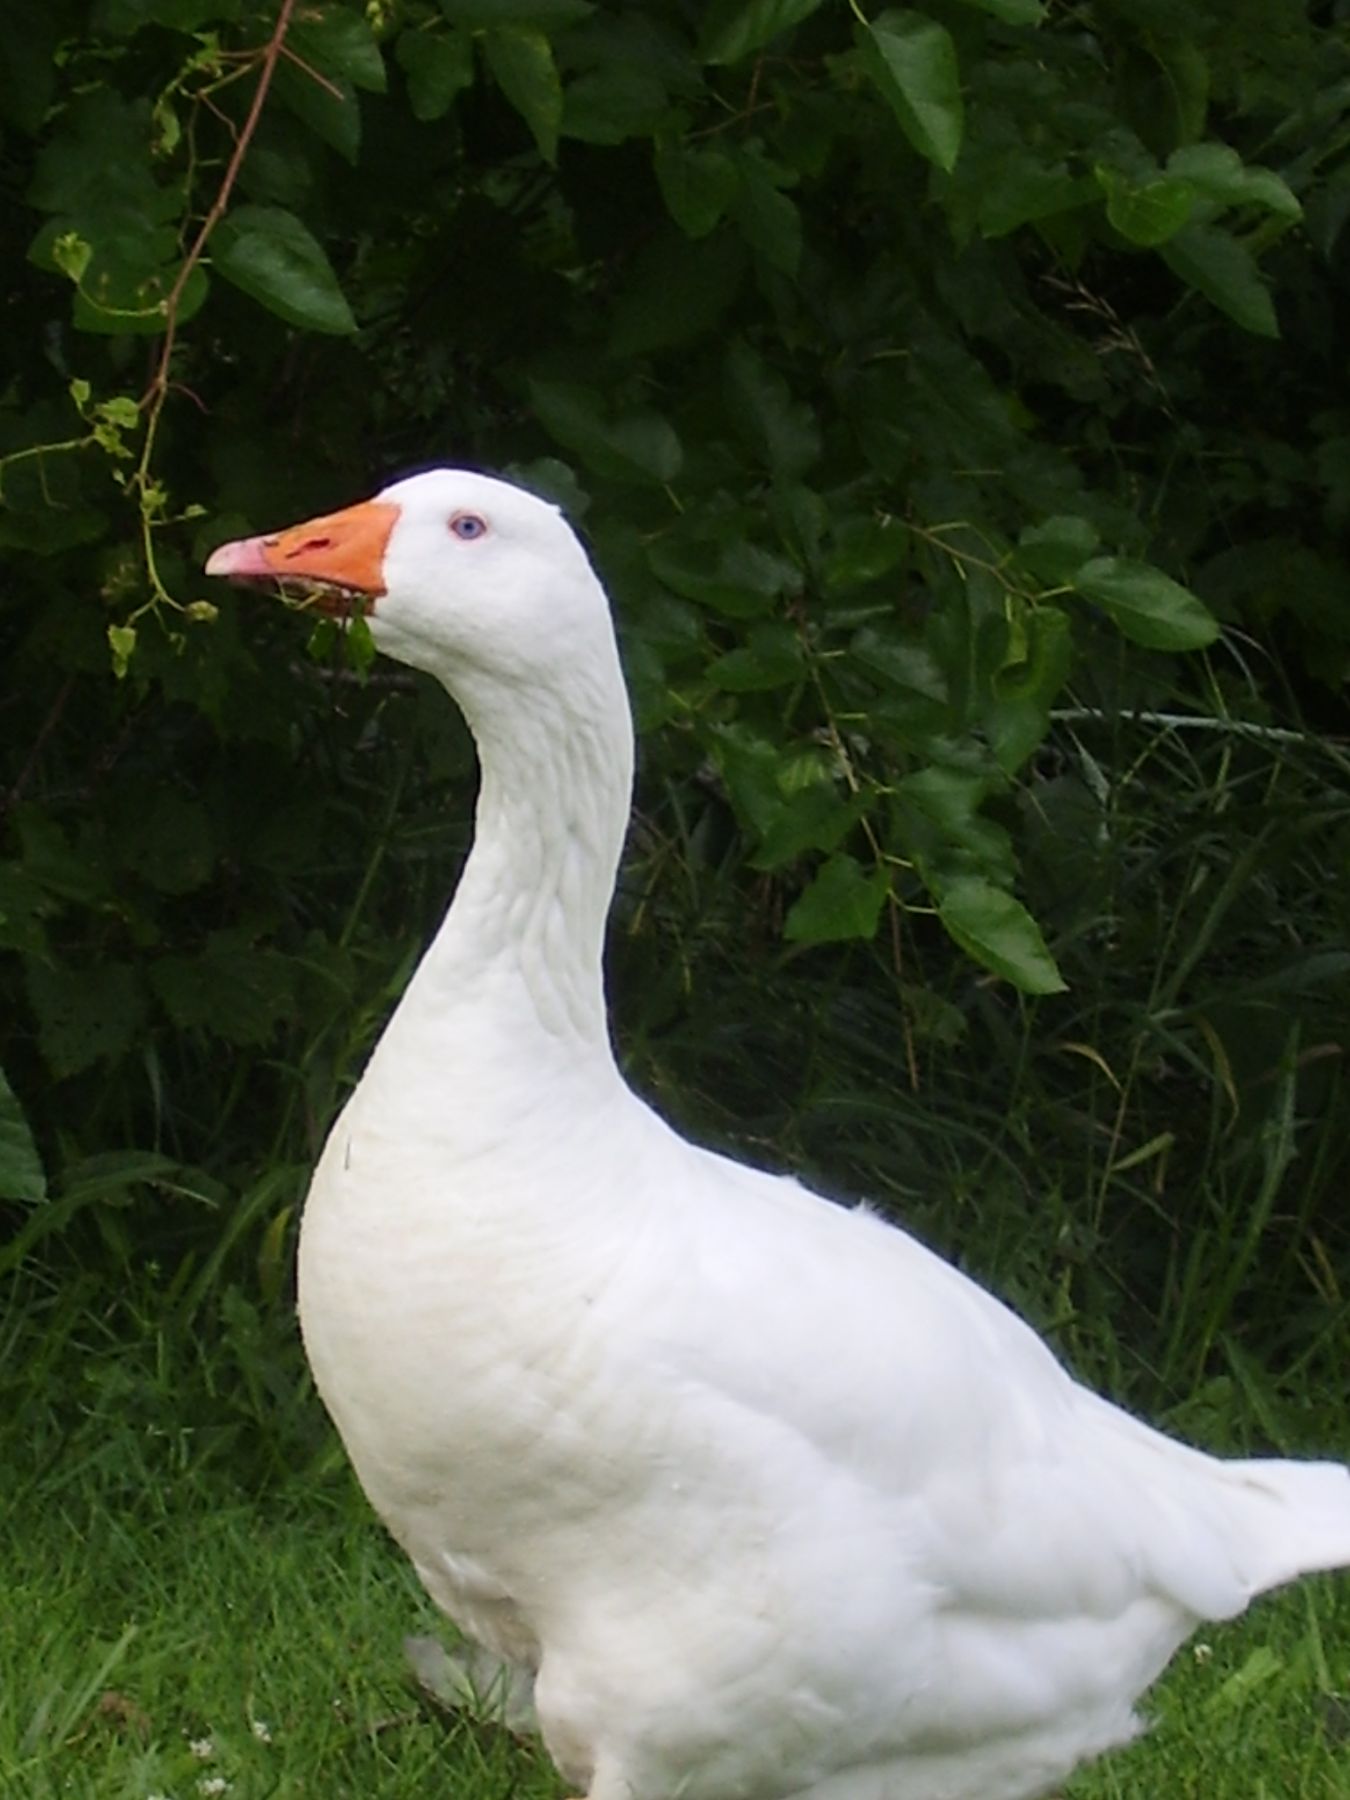 Most people picture a duck and it’s either as the wild duck or the all whit...